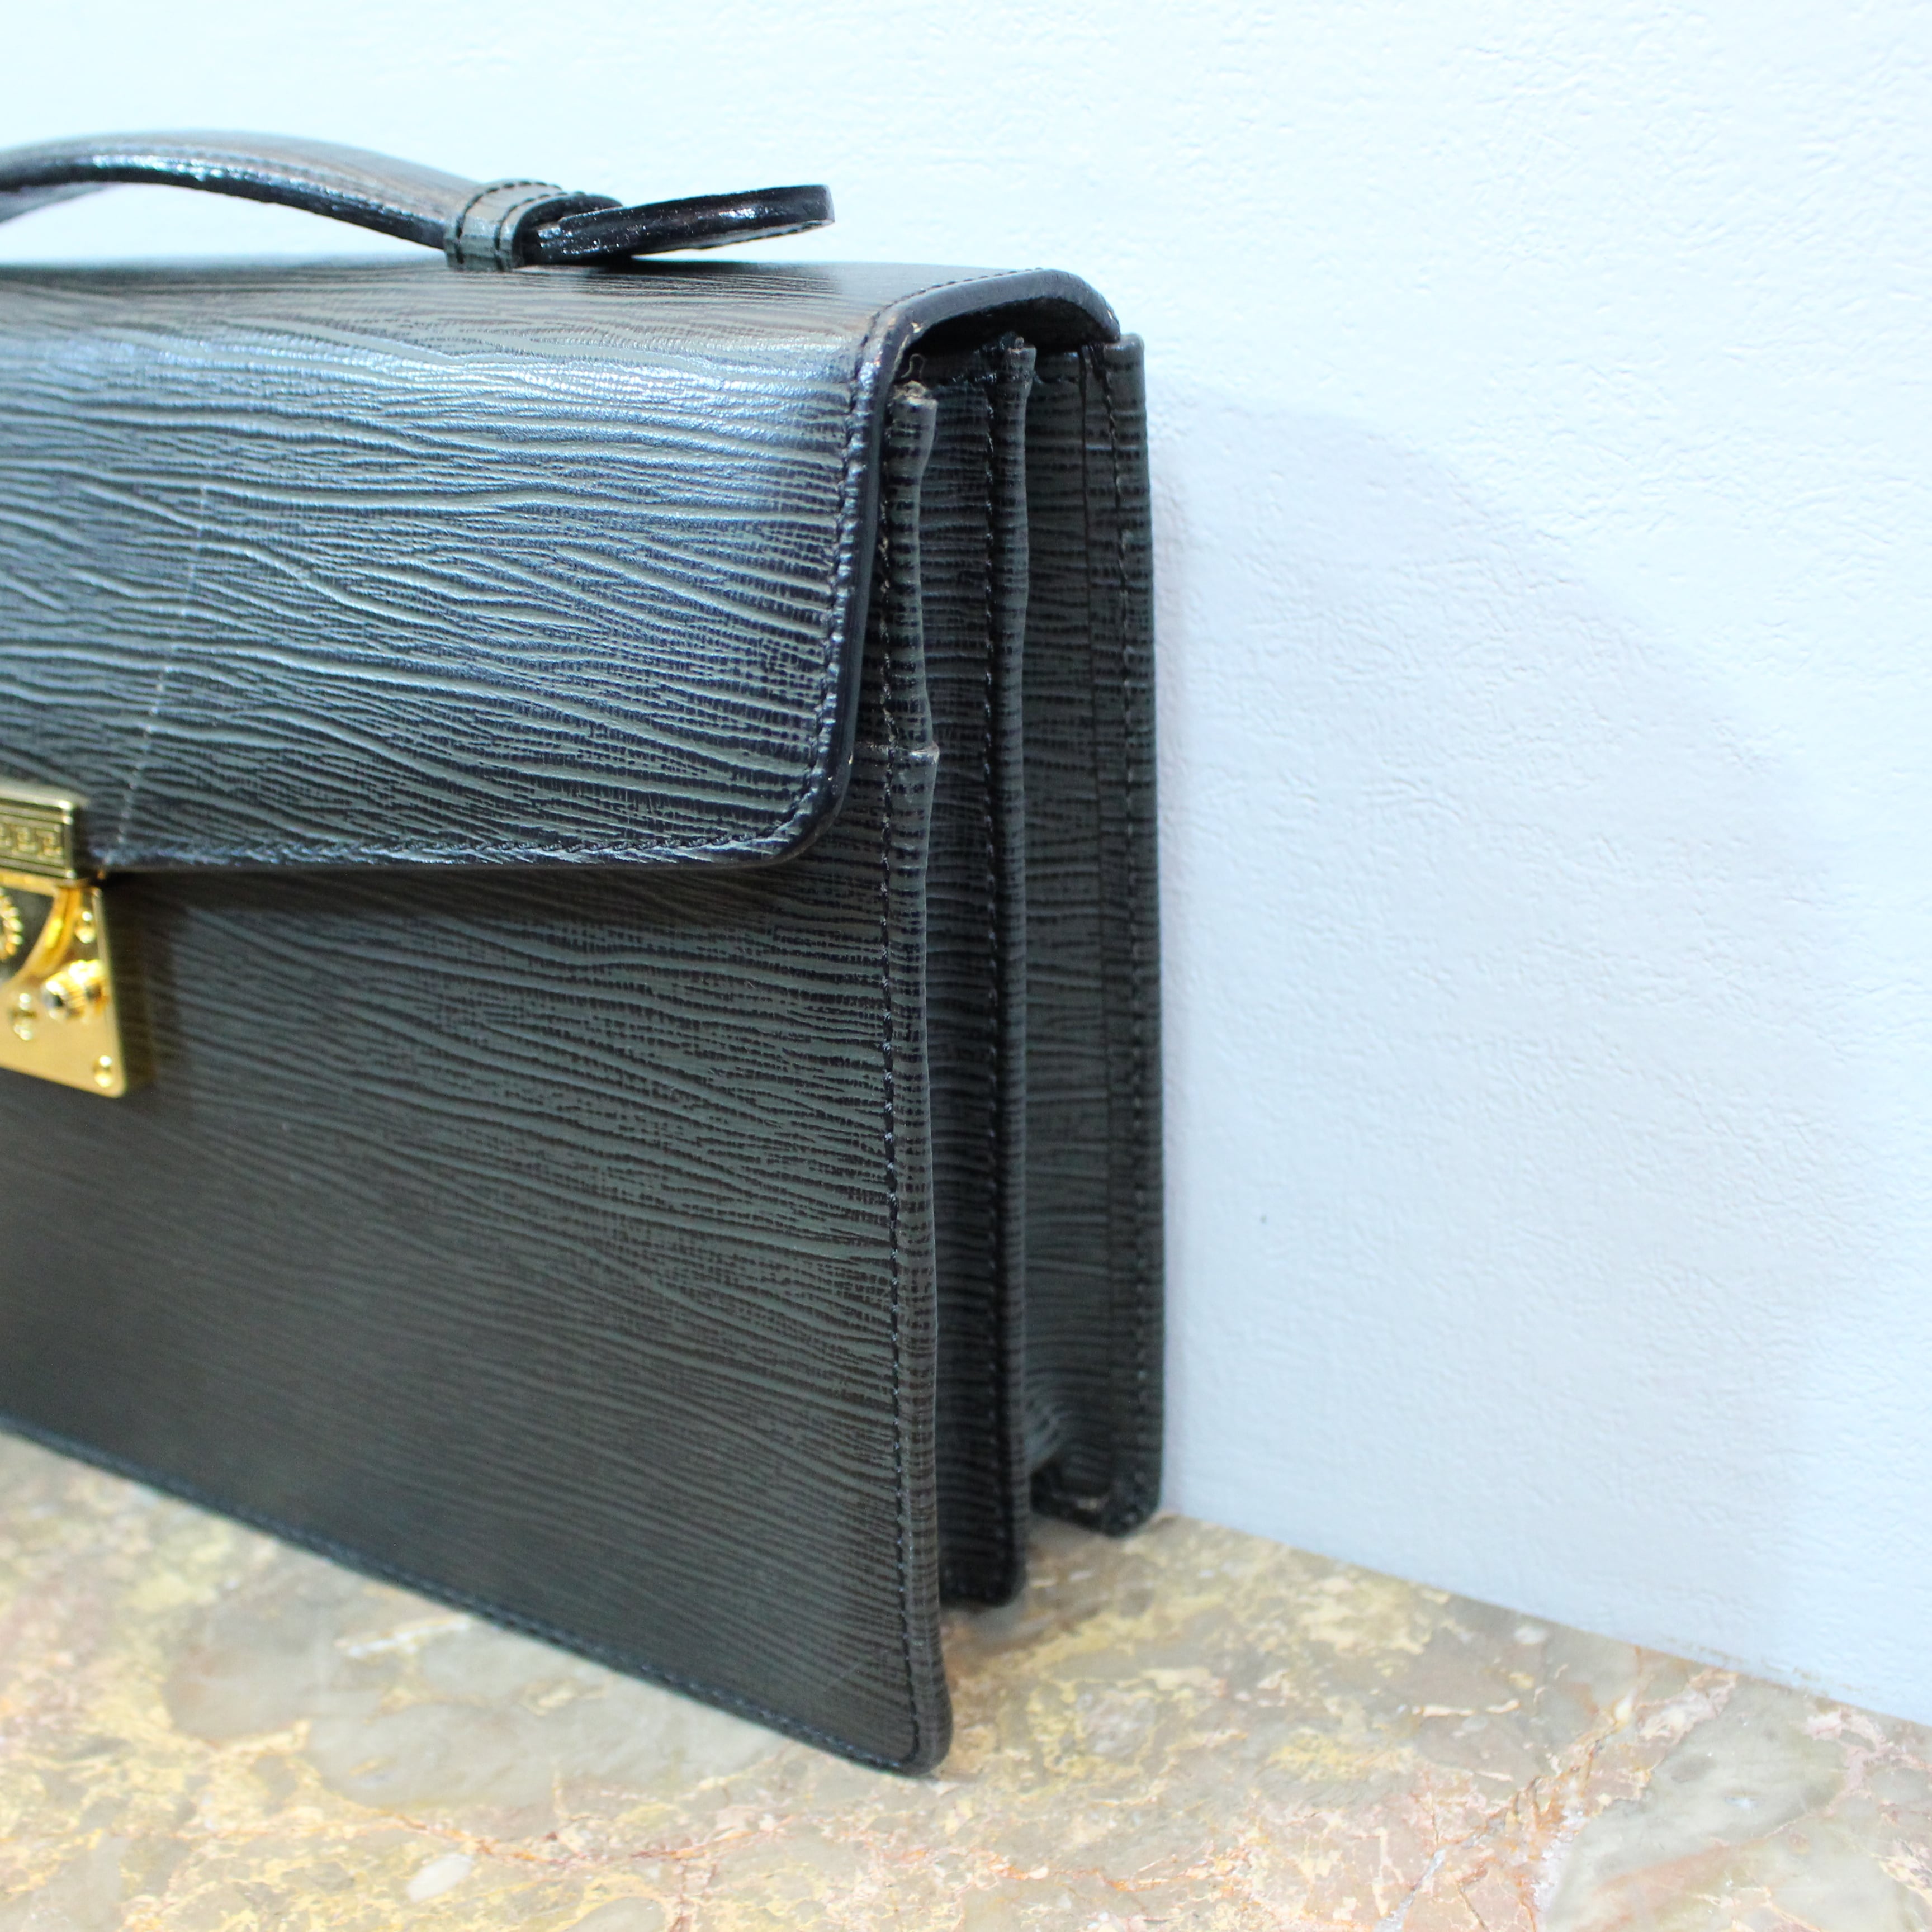 2000000026848 GIANNI VERSACE LEATHER BUSINESS BAG STYLED IN ITALY